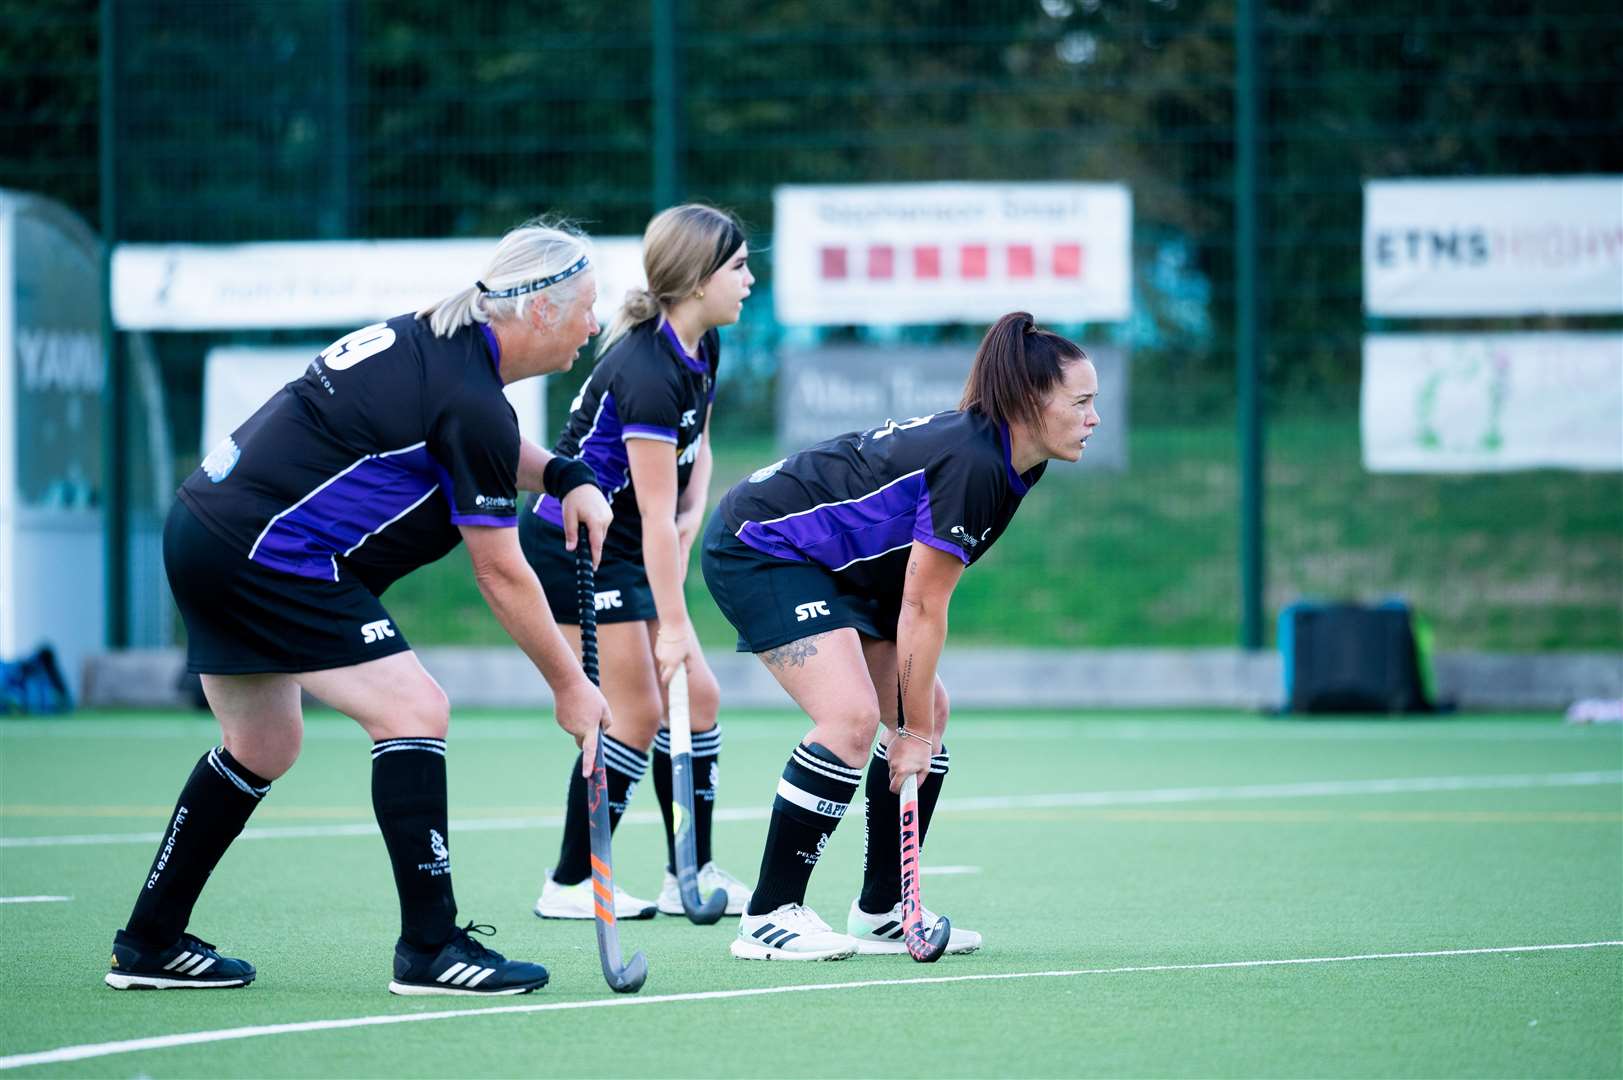 Pelicans Ladies against City of Peterborough 3rds at Alive Lynnsport. Picture: Ian Burt